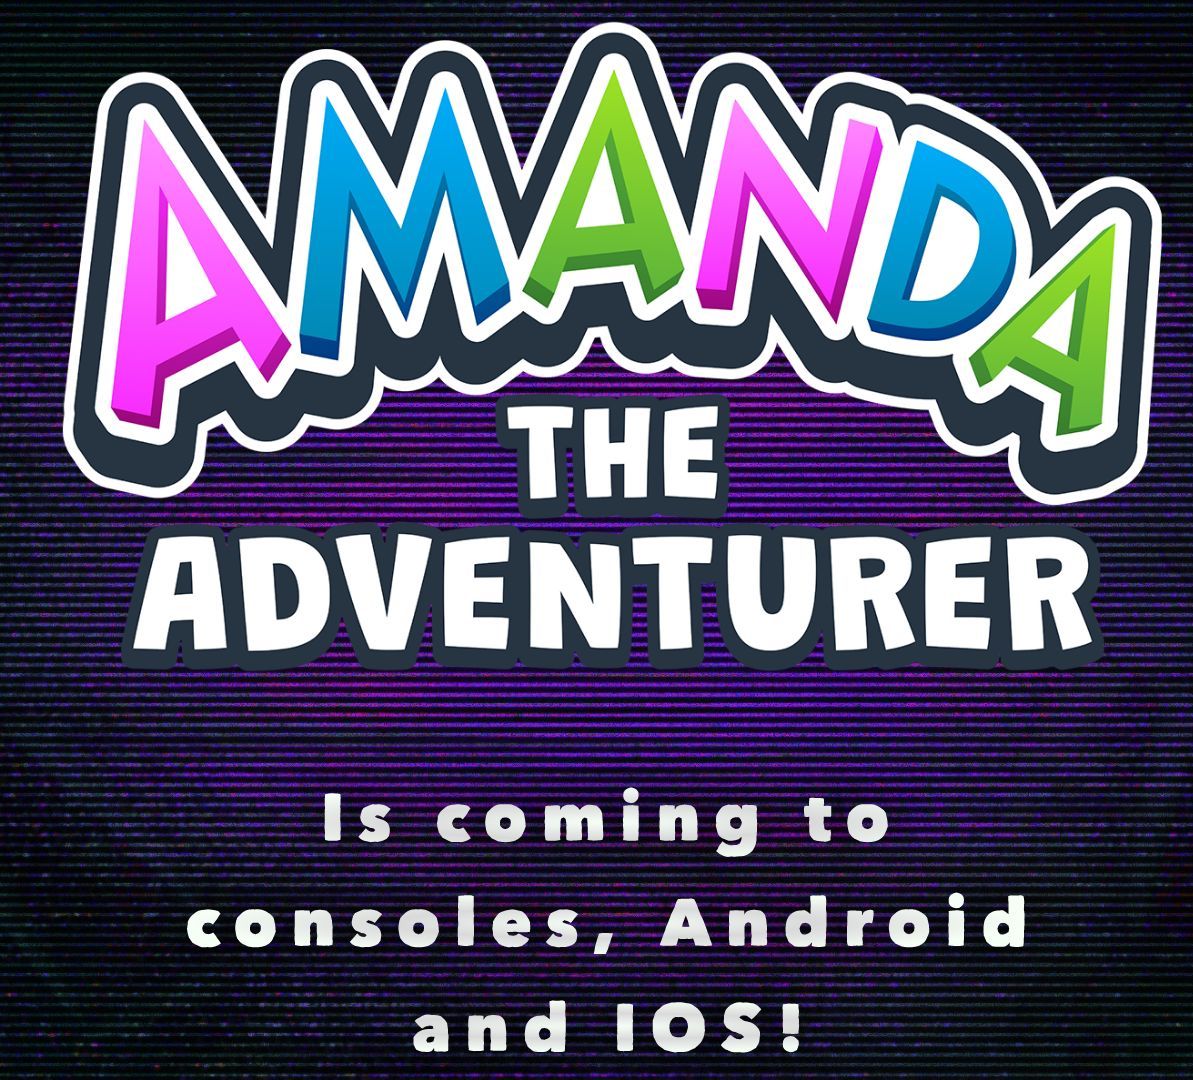 You've asked, you've commented, you've sent letters, you've asked on Discord (a lot). Yeah okay. AMANDA THE ADVENTURER IS COMING TO CONSOLES and IOS/Android. CONFIRMED. OFFICIAL. HAPPENING. STAY TUNED.